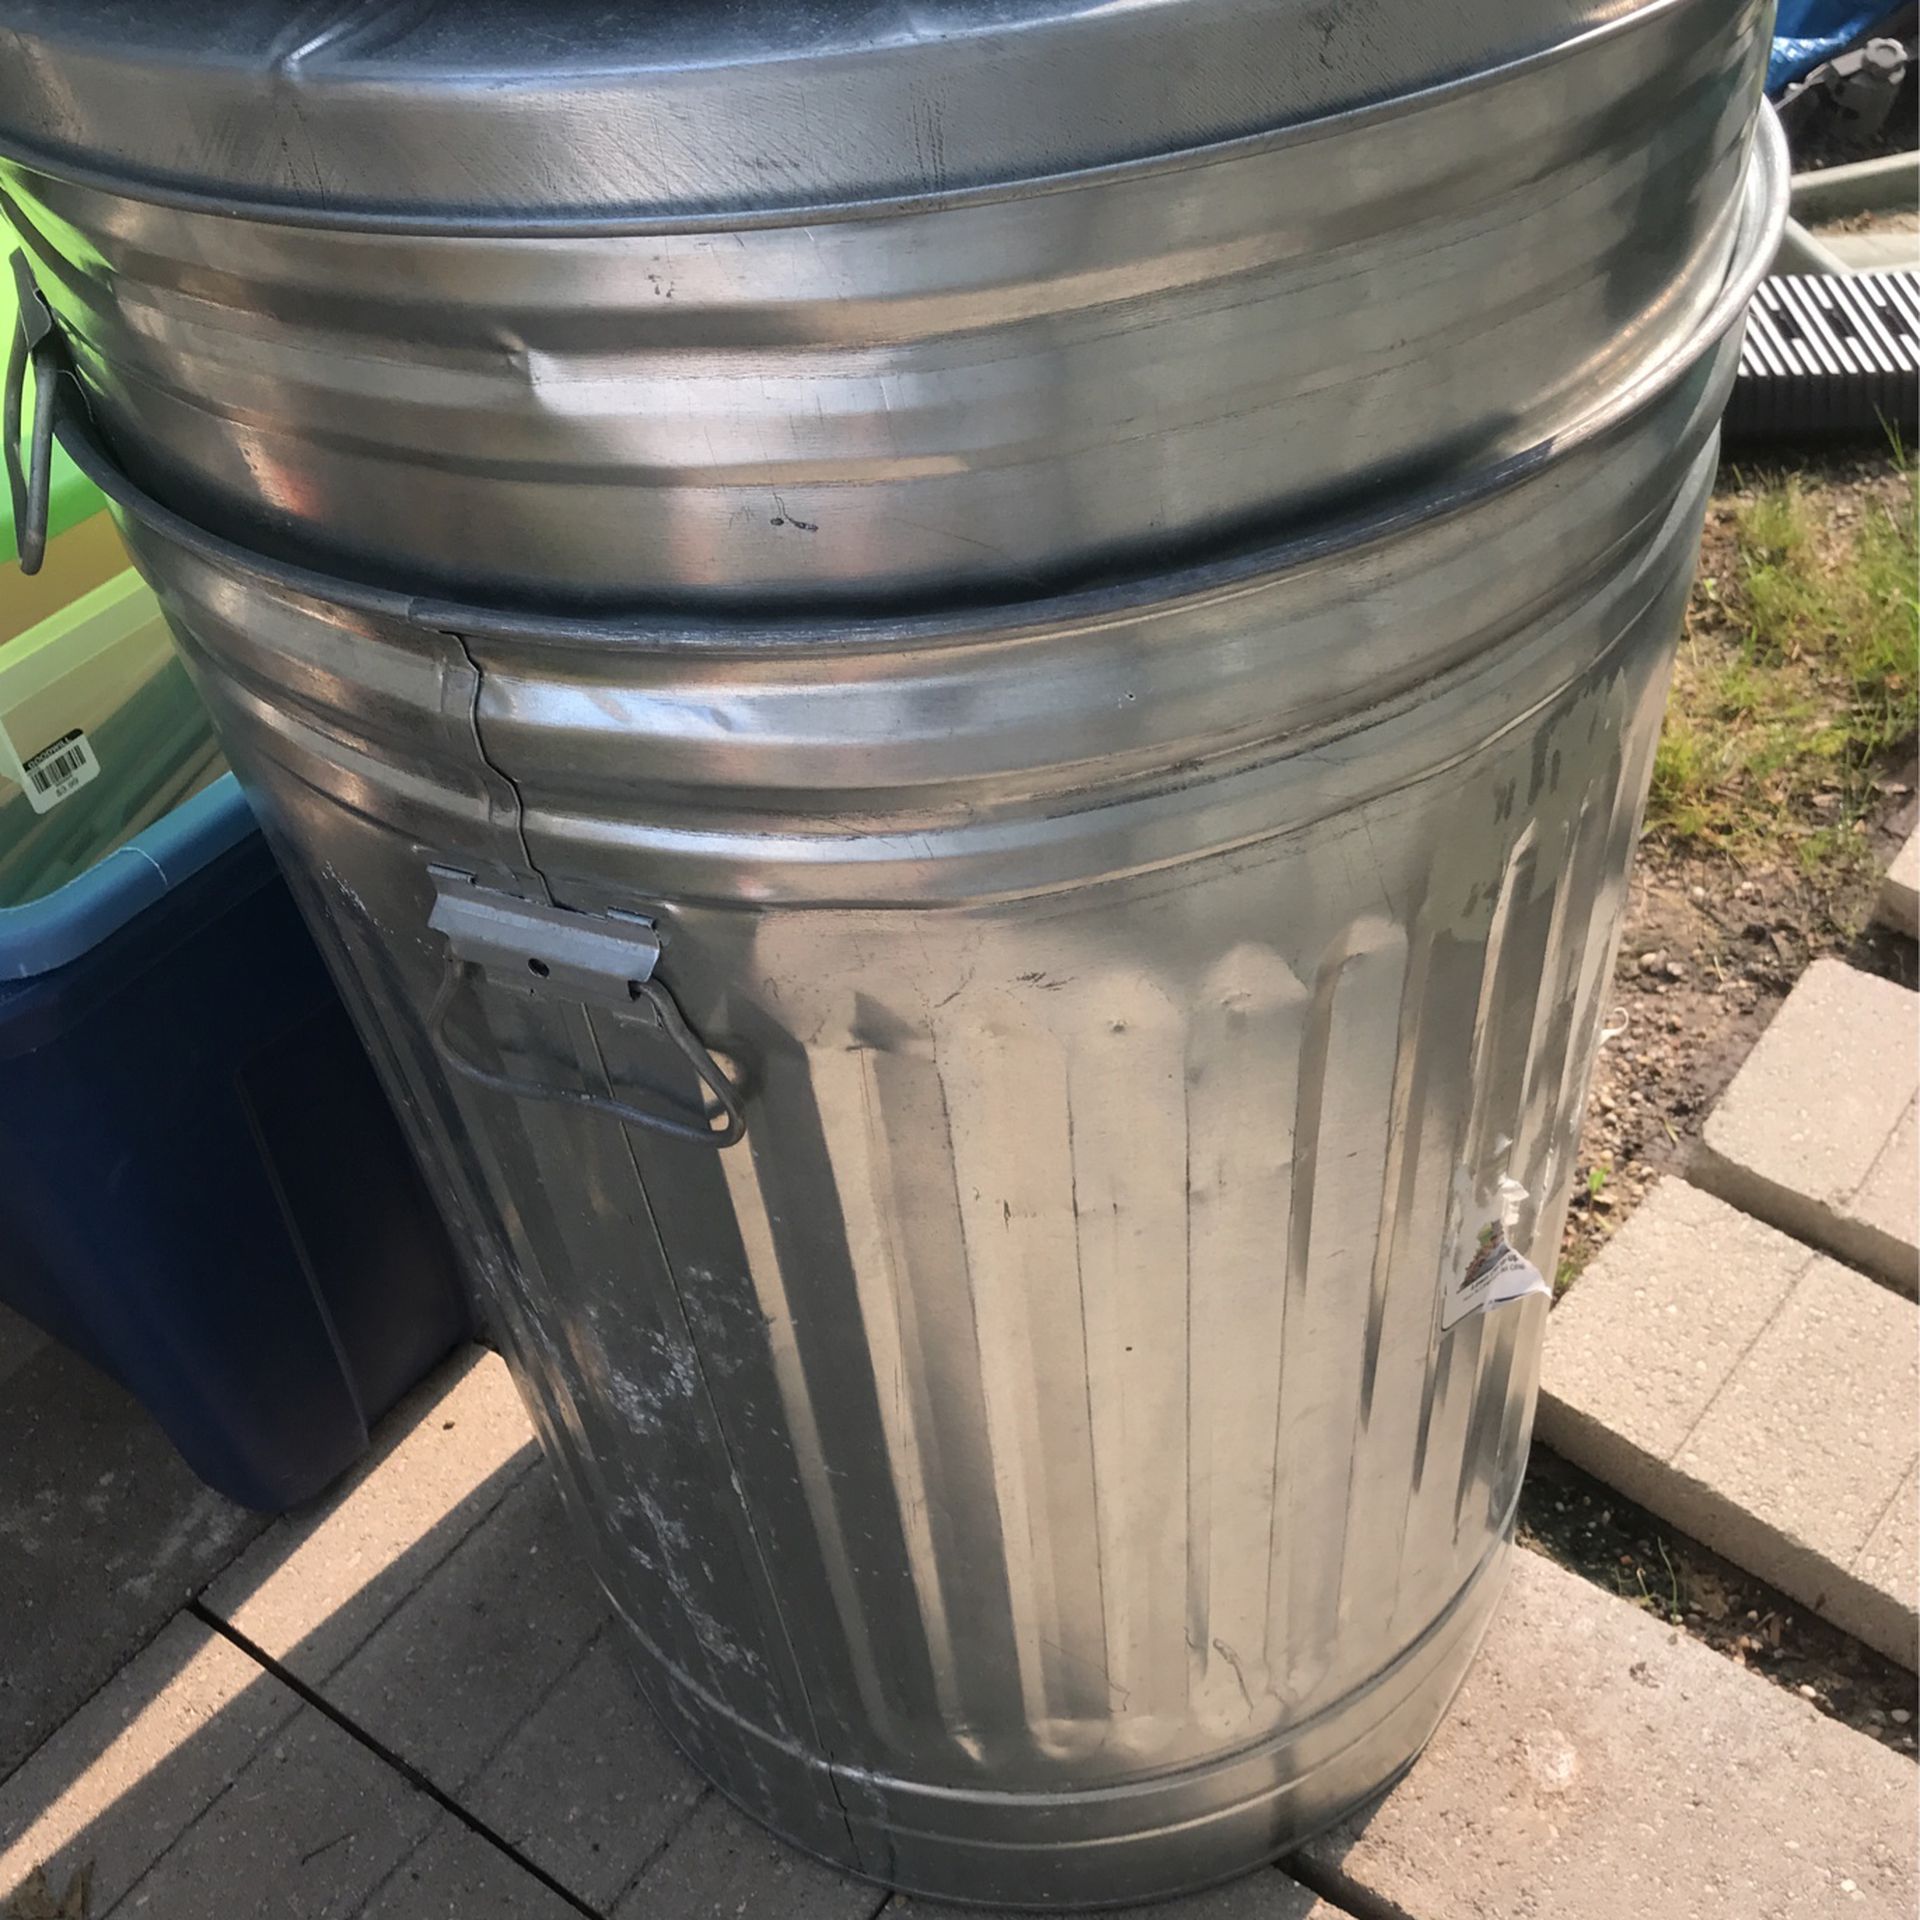 32 Gal. Galvanized Garbage Cana With Lids